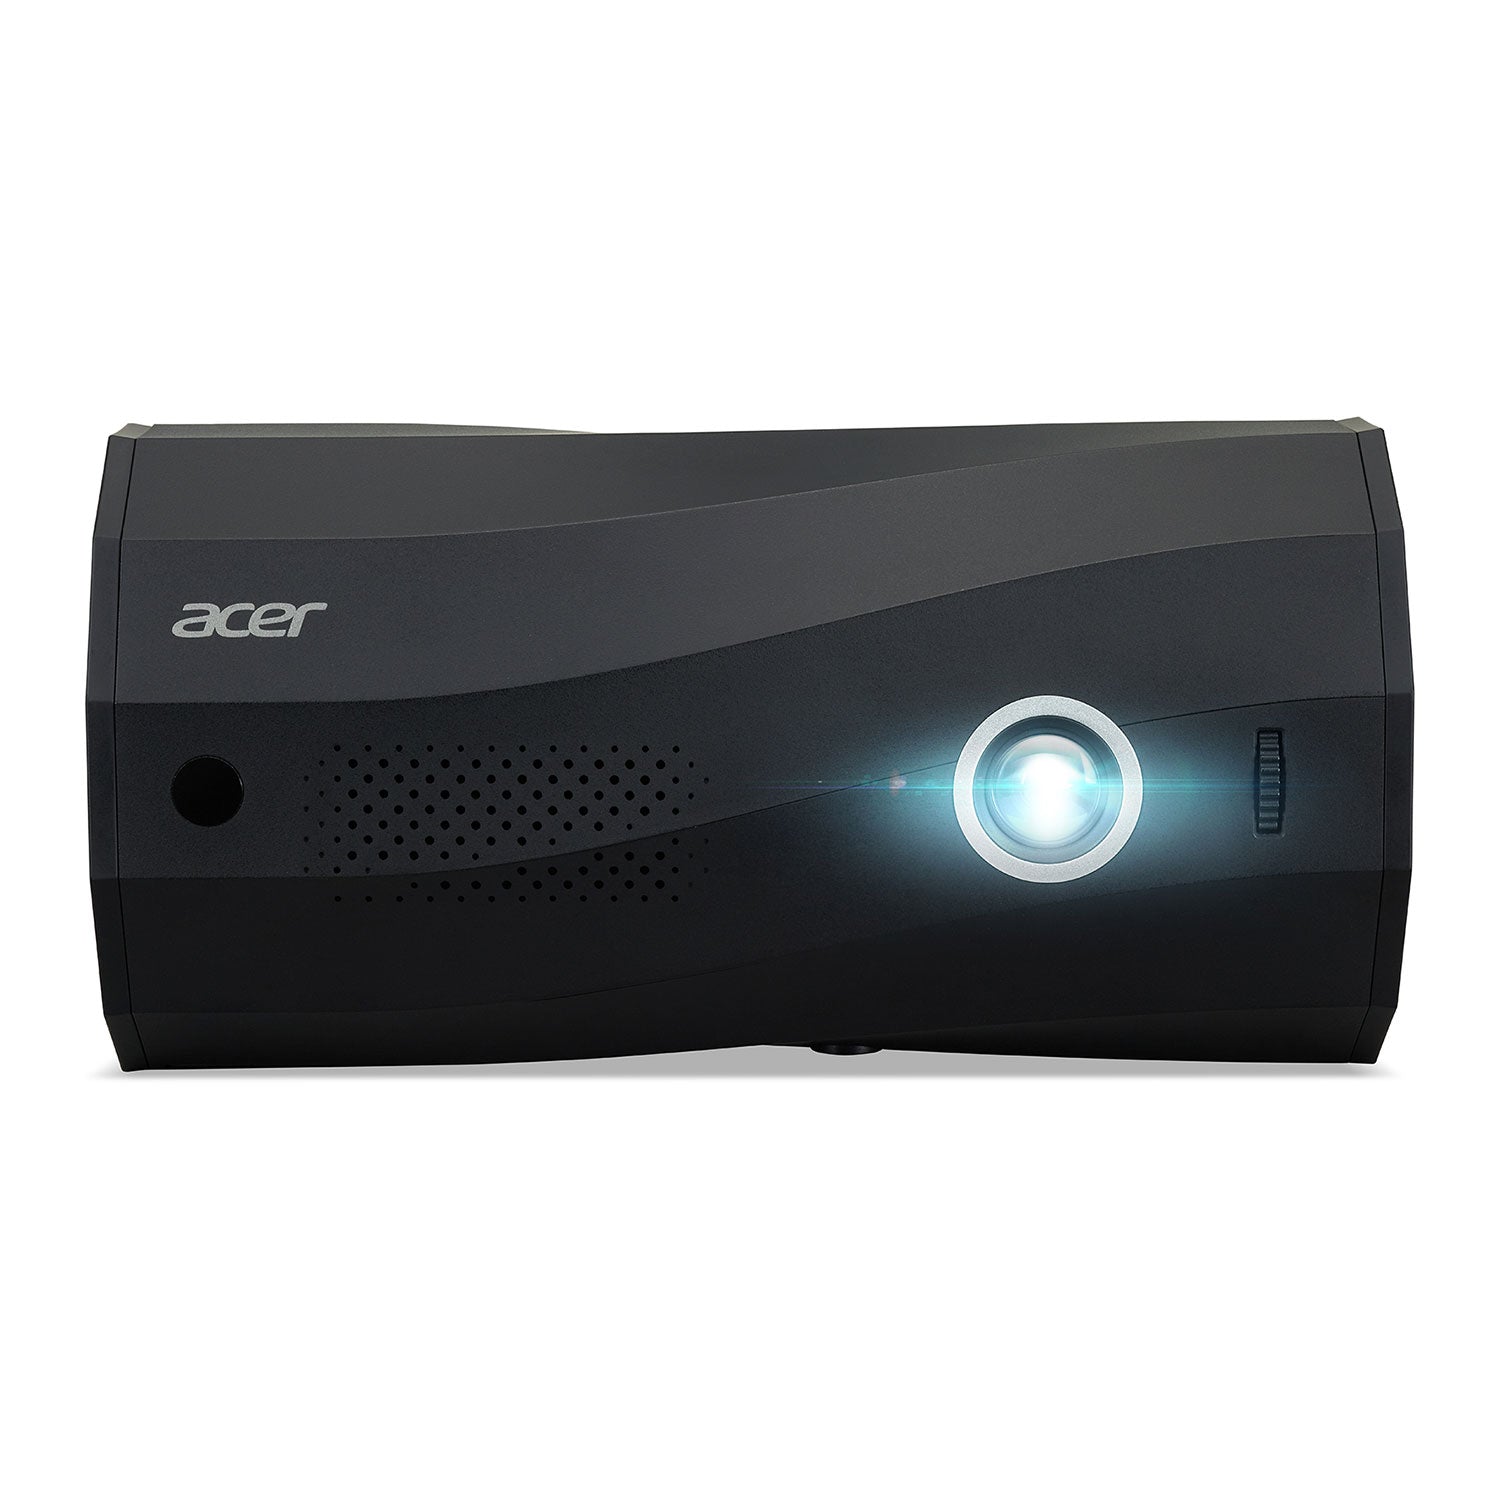 Acer C250i Full HD 1080p Portable DLP Projector with WiFi